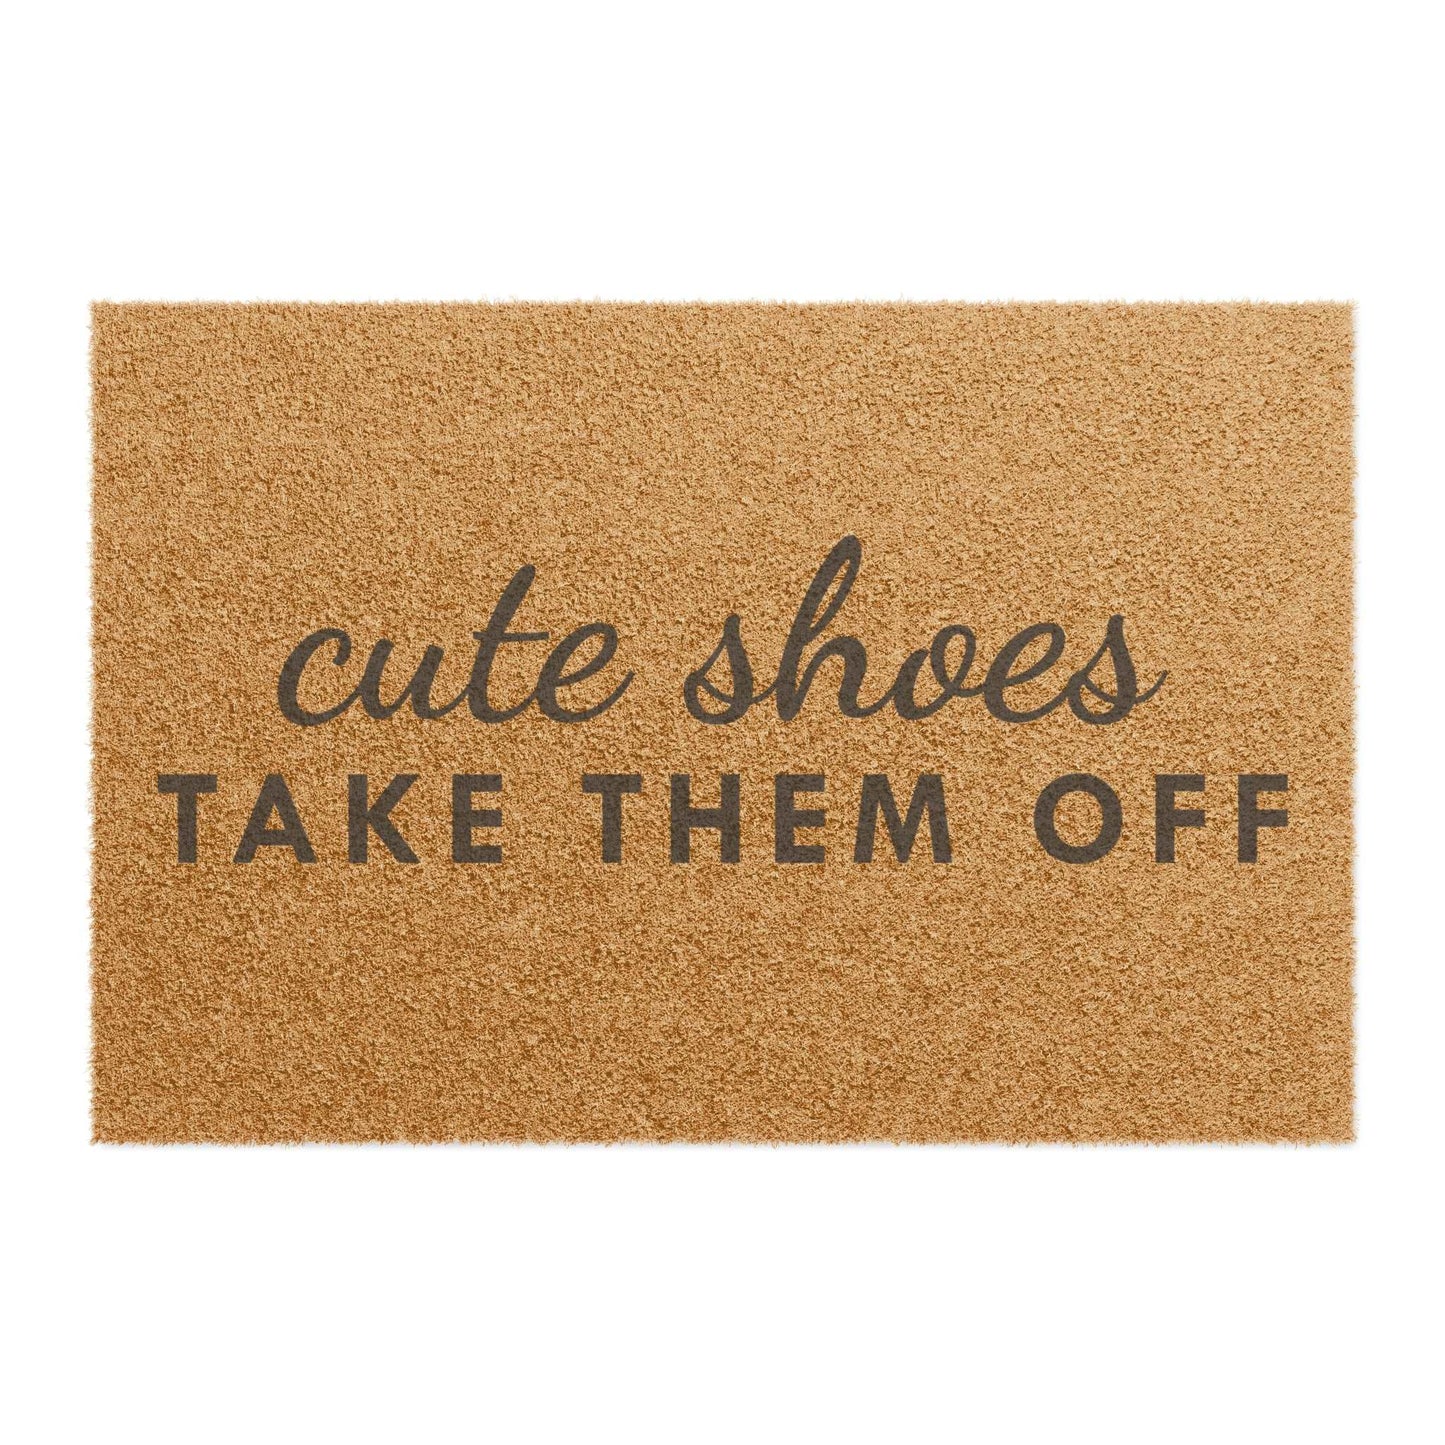 Cute Shoes now take them off Doormat, Funny Doormat, Welcome Doormat | Home Decor | Assembled in the USA, Assembled in USA, Eco-friendly, Funny Doormat, Home & Living, Home Decor, Made in the USA, Made in USA, Outdoor, Please knock so we have time to clean, Rugs & Mats, welcome doormat | Printify